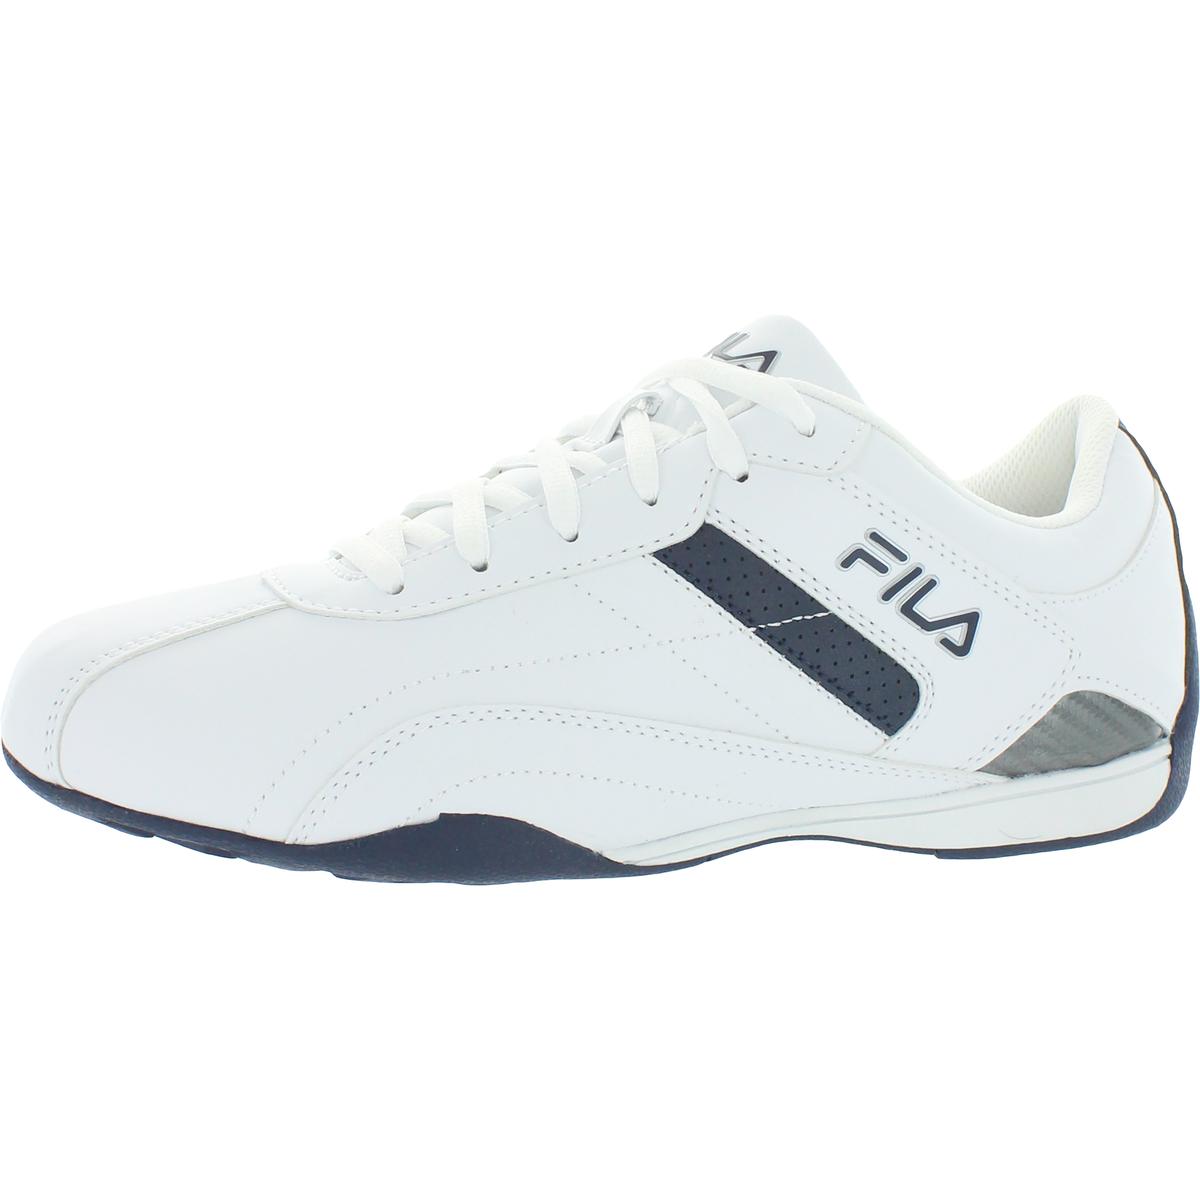 Fila Kalien T Mens Motorsport Lifestyle Casual and Fashion Sneakers